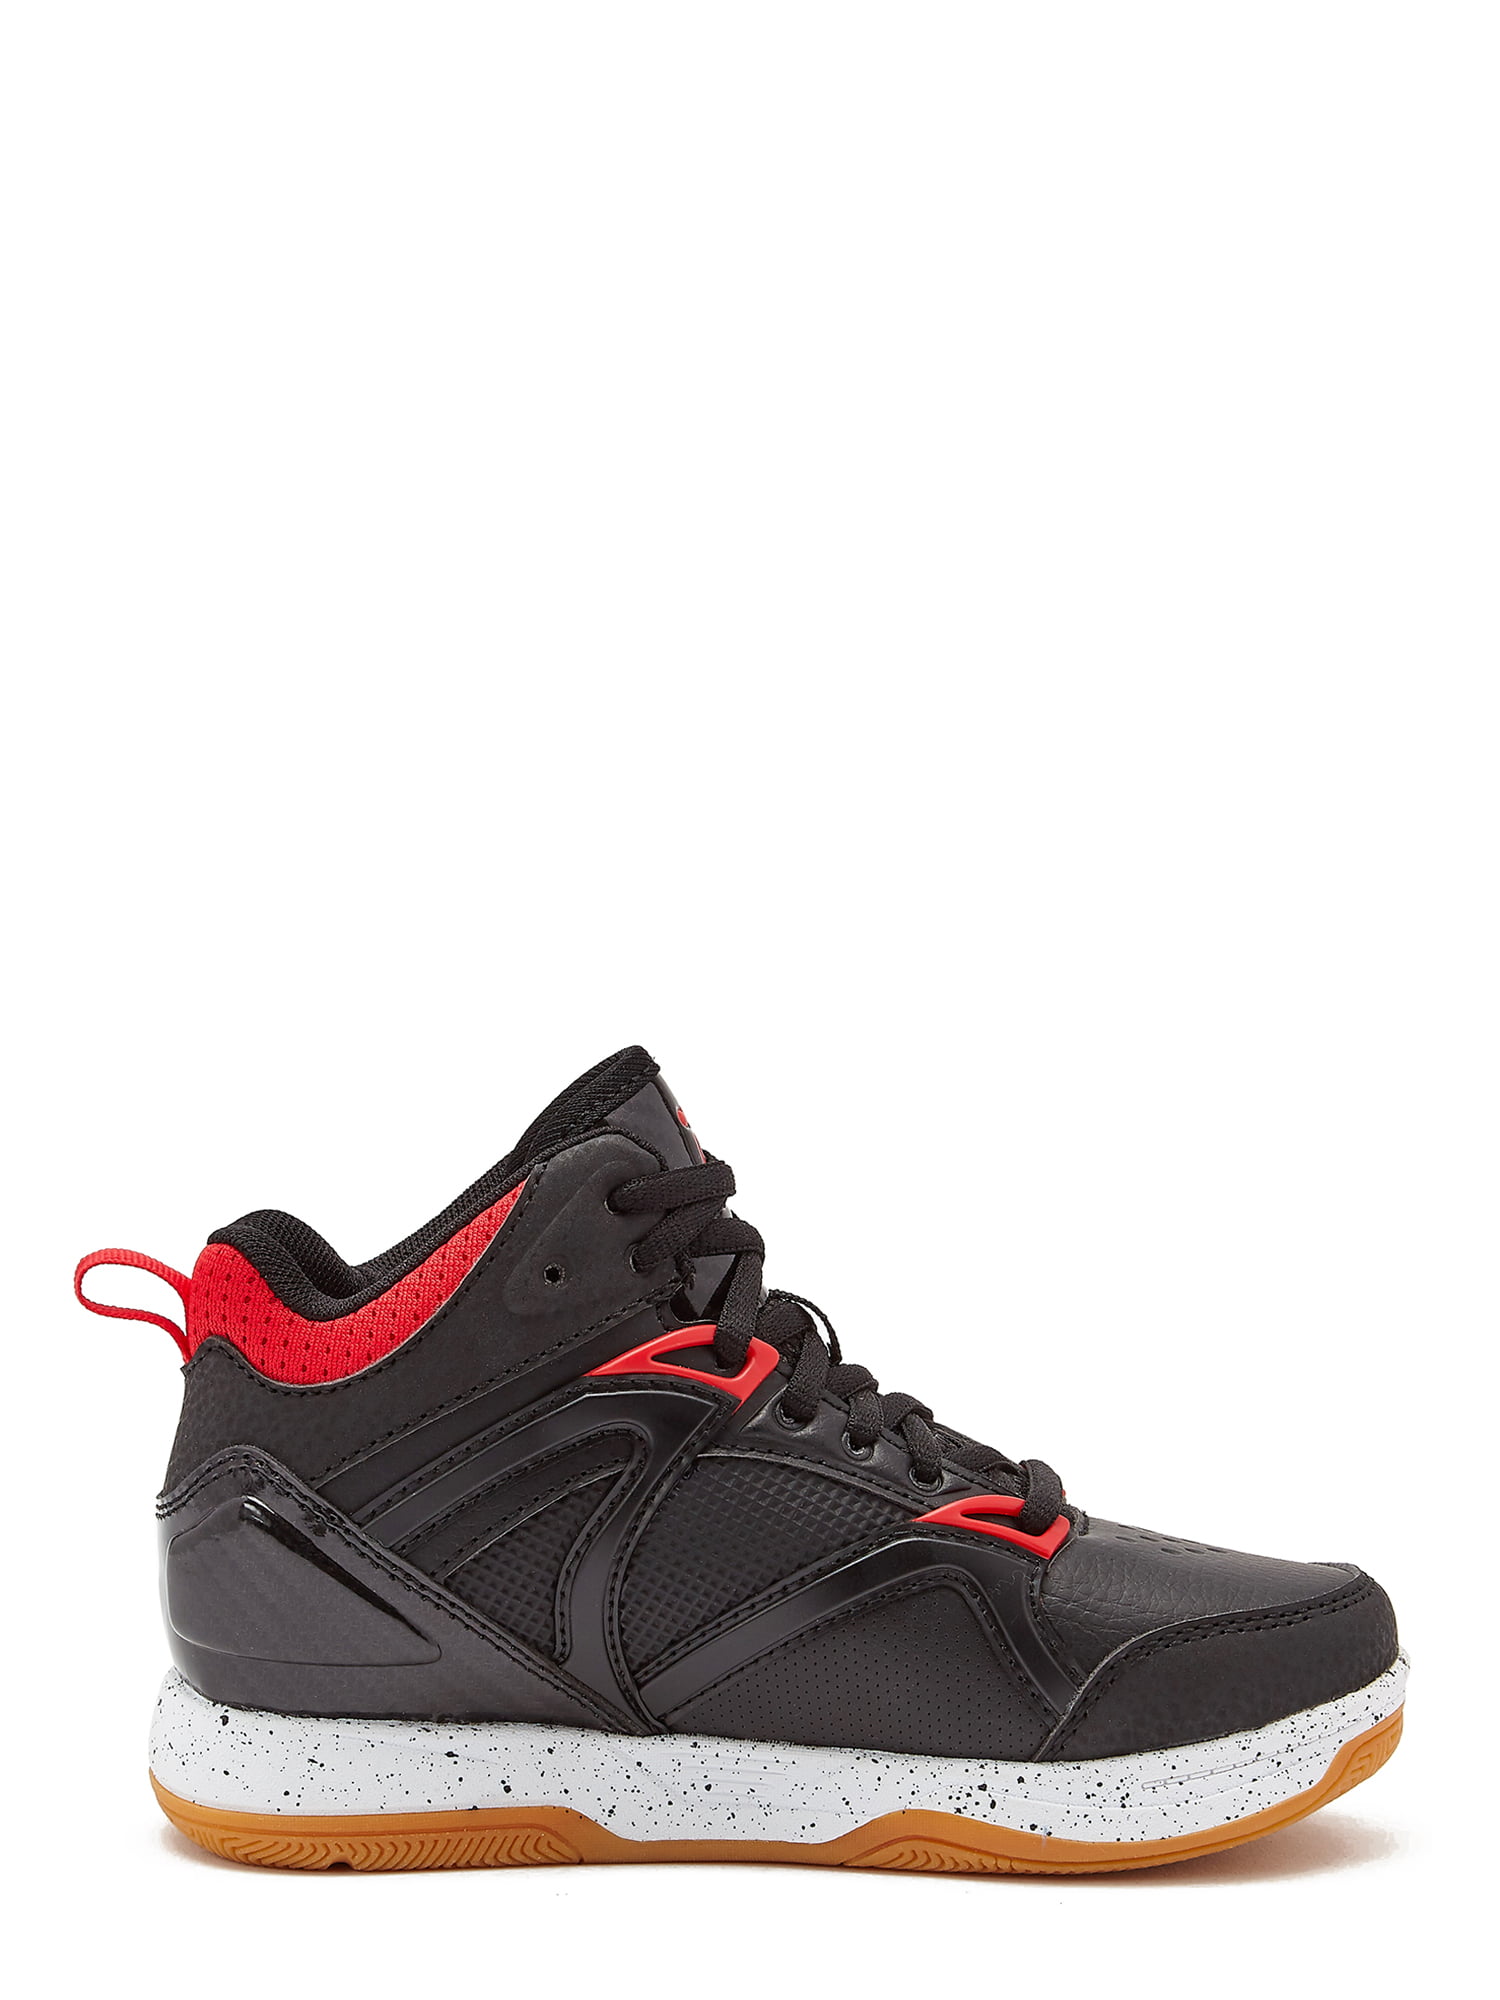 Little & Big Boys Lace-up Basketball Sneakers, Sizes 13-6 - Walmart.com